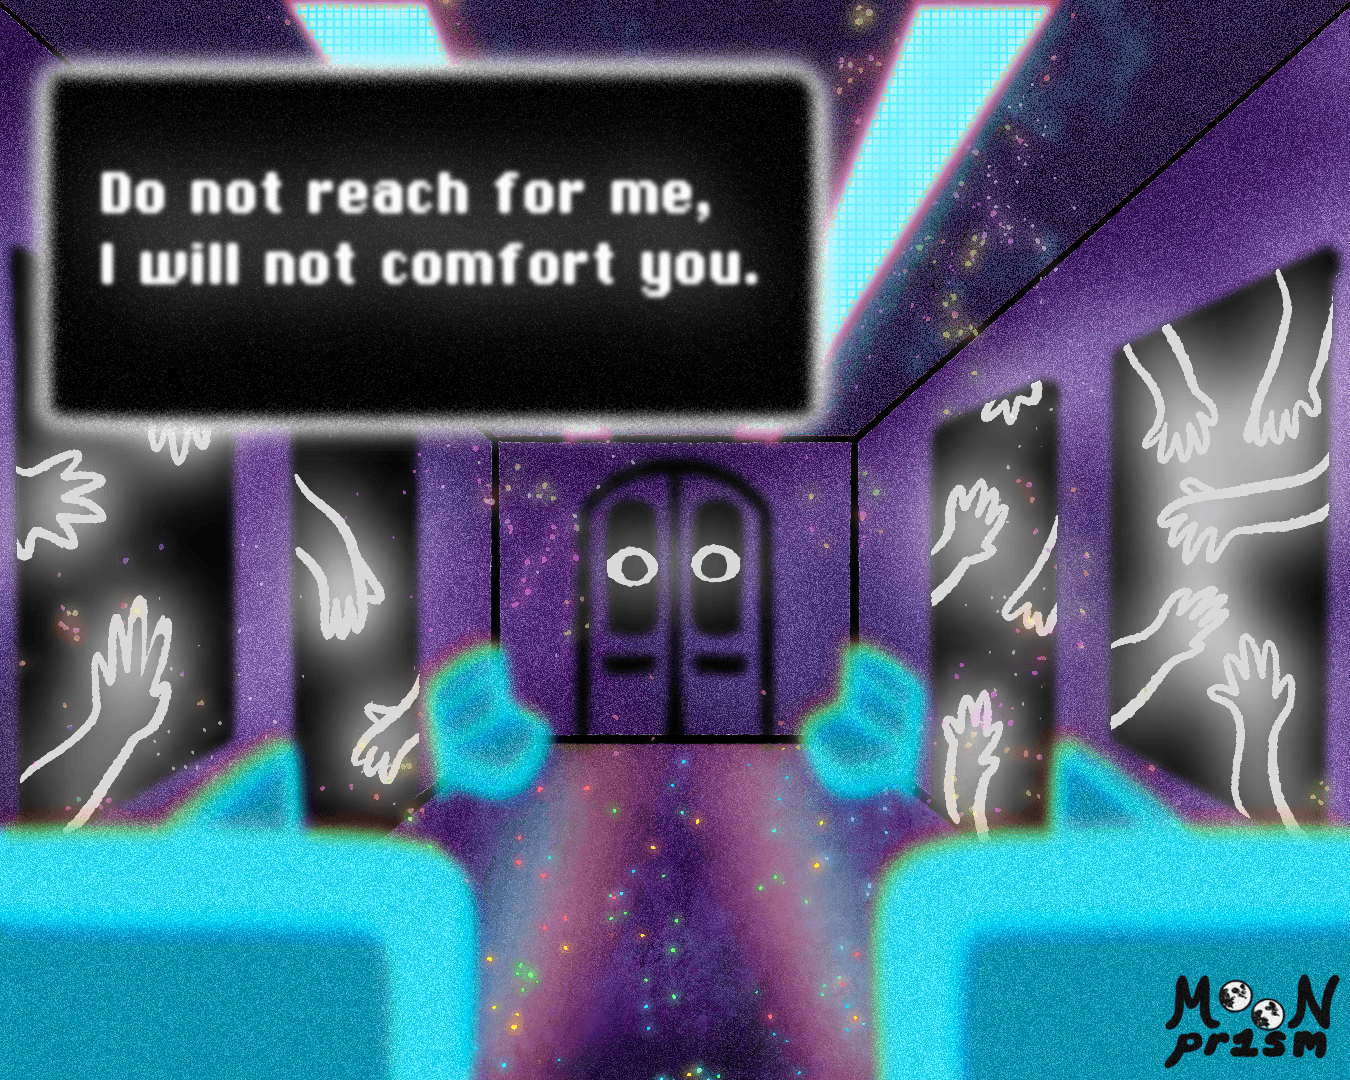 An illustration of a surreal purple and blue subway car. There are ghostly white hands and arms visible in the windows and exits, and straight ahead are a pair of staring eyes. There is a text box that reads 'Do not reach for me. I will not comfort you.'.